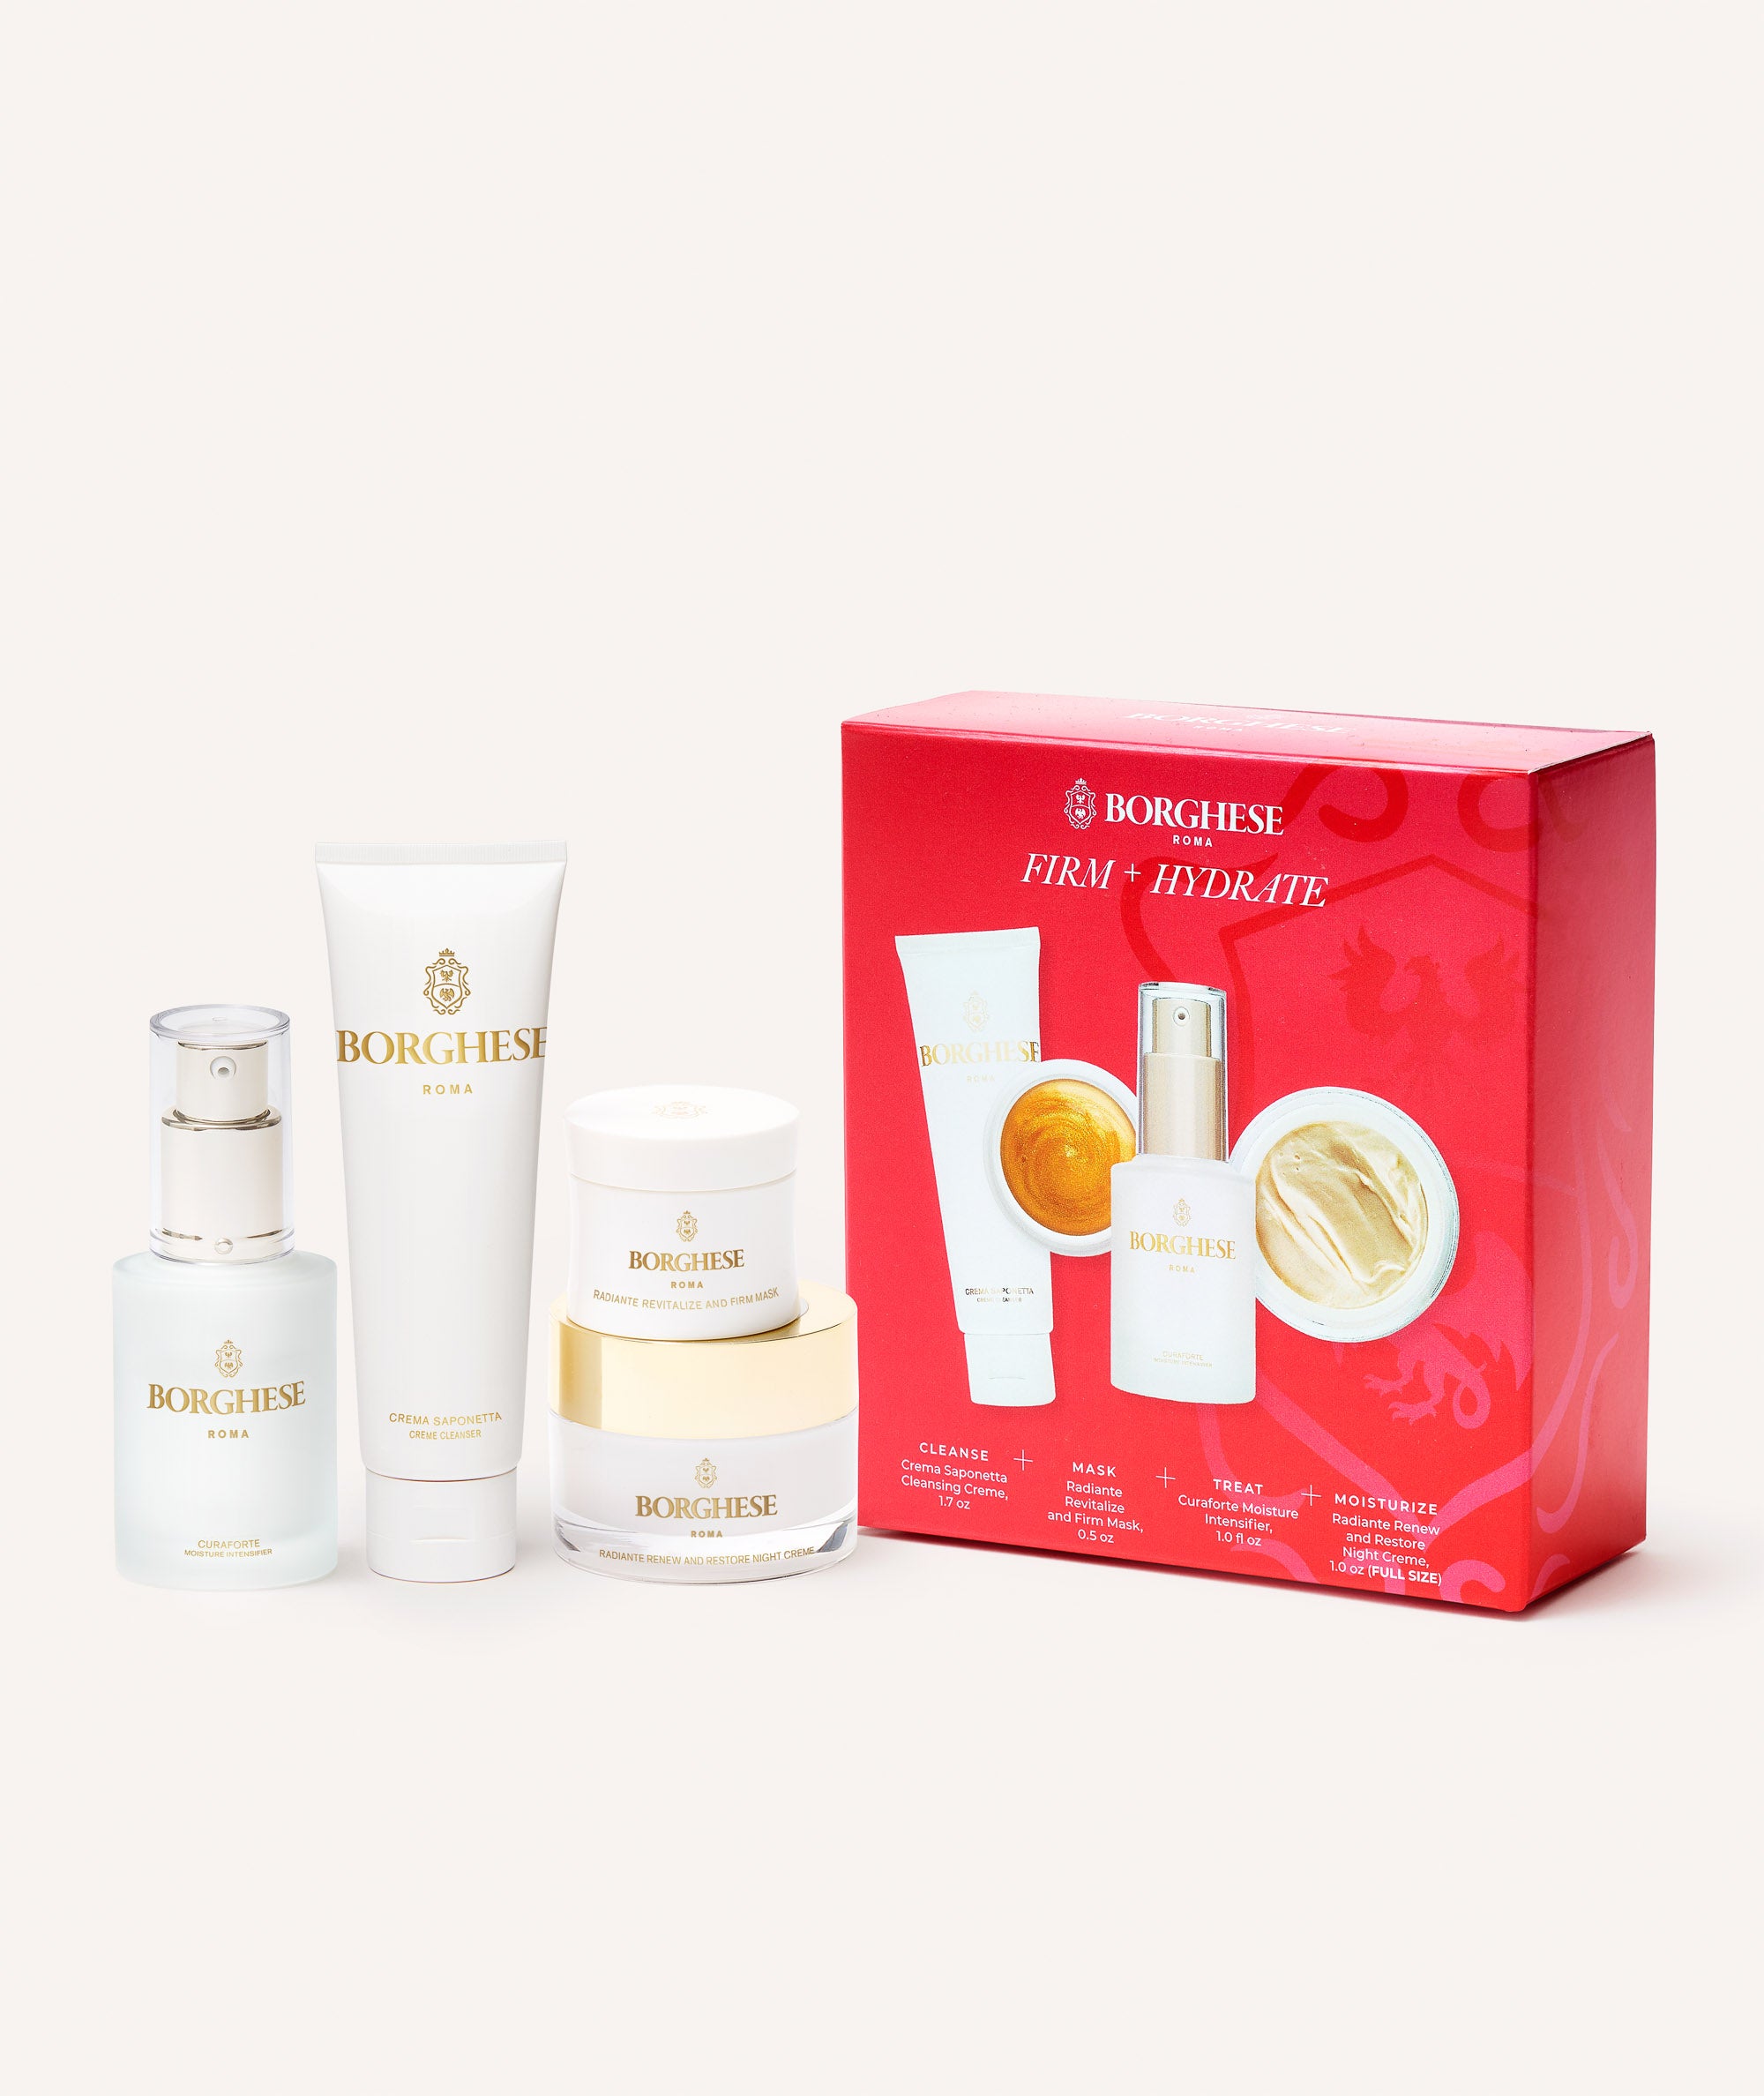 Borghese 4-Piece Firm & Hydrate Gift Set $55 ($159 value)